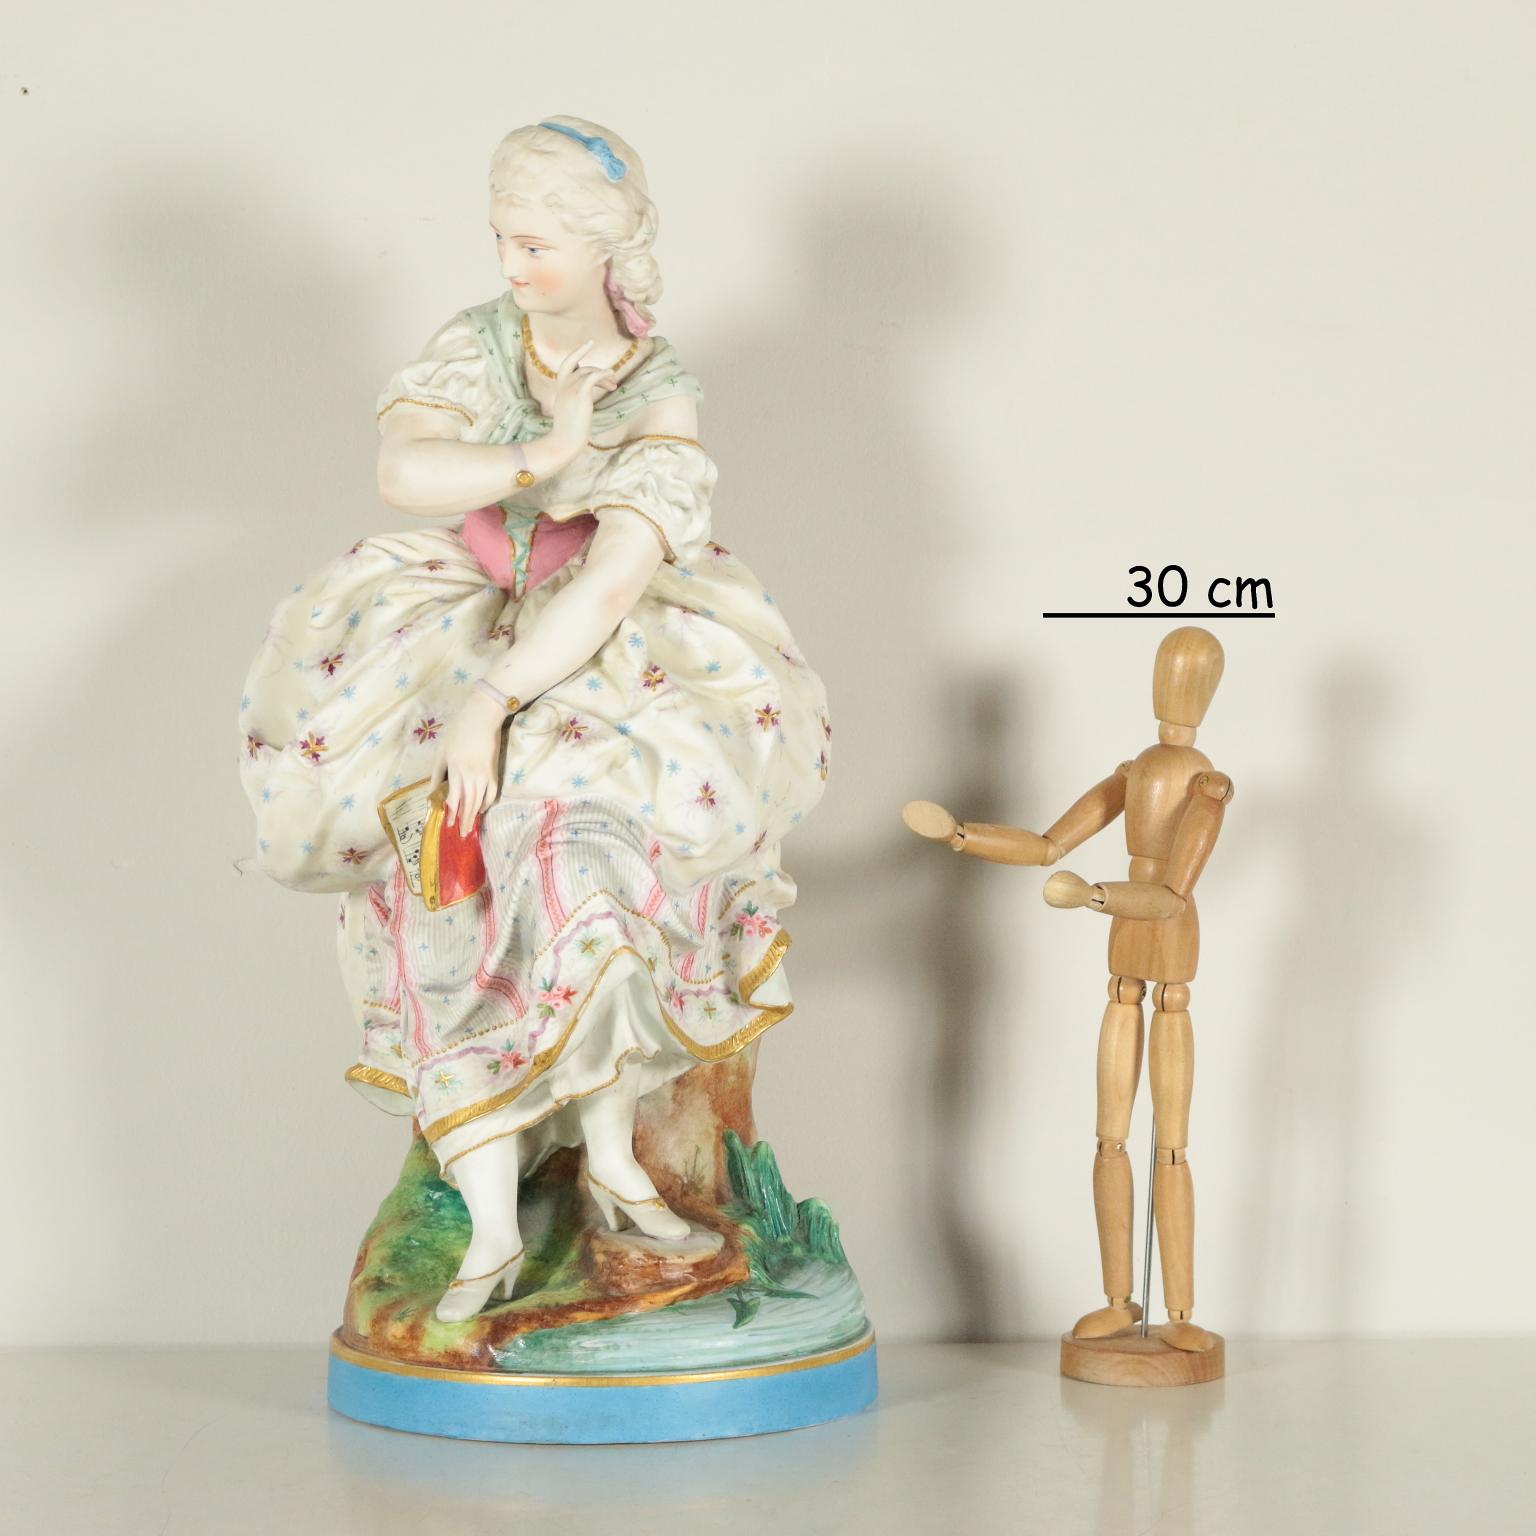 Big bisque sculpture decorated with a polychromed young lady wearing an 18th century dress and holding a music score.